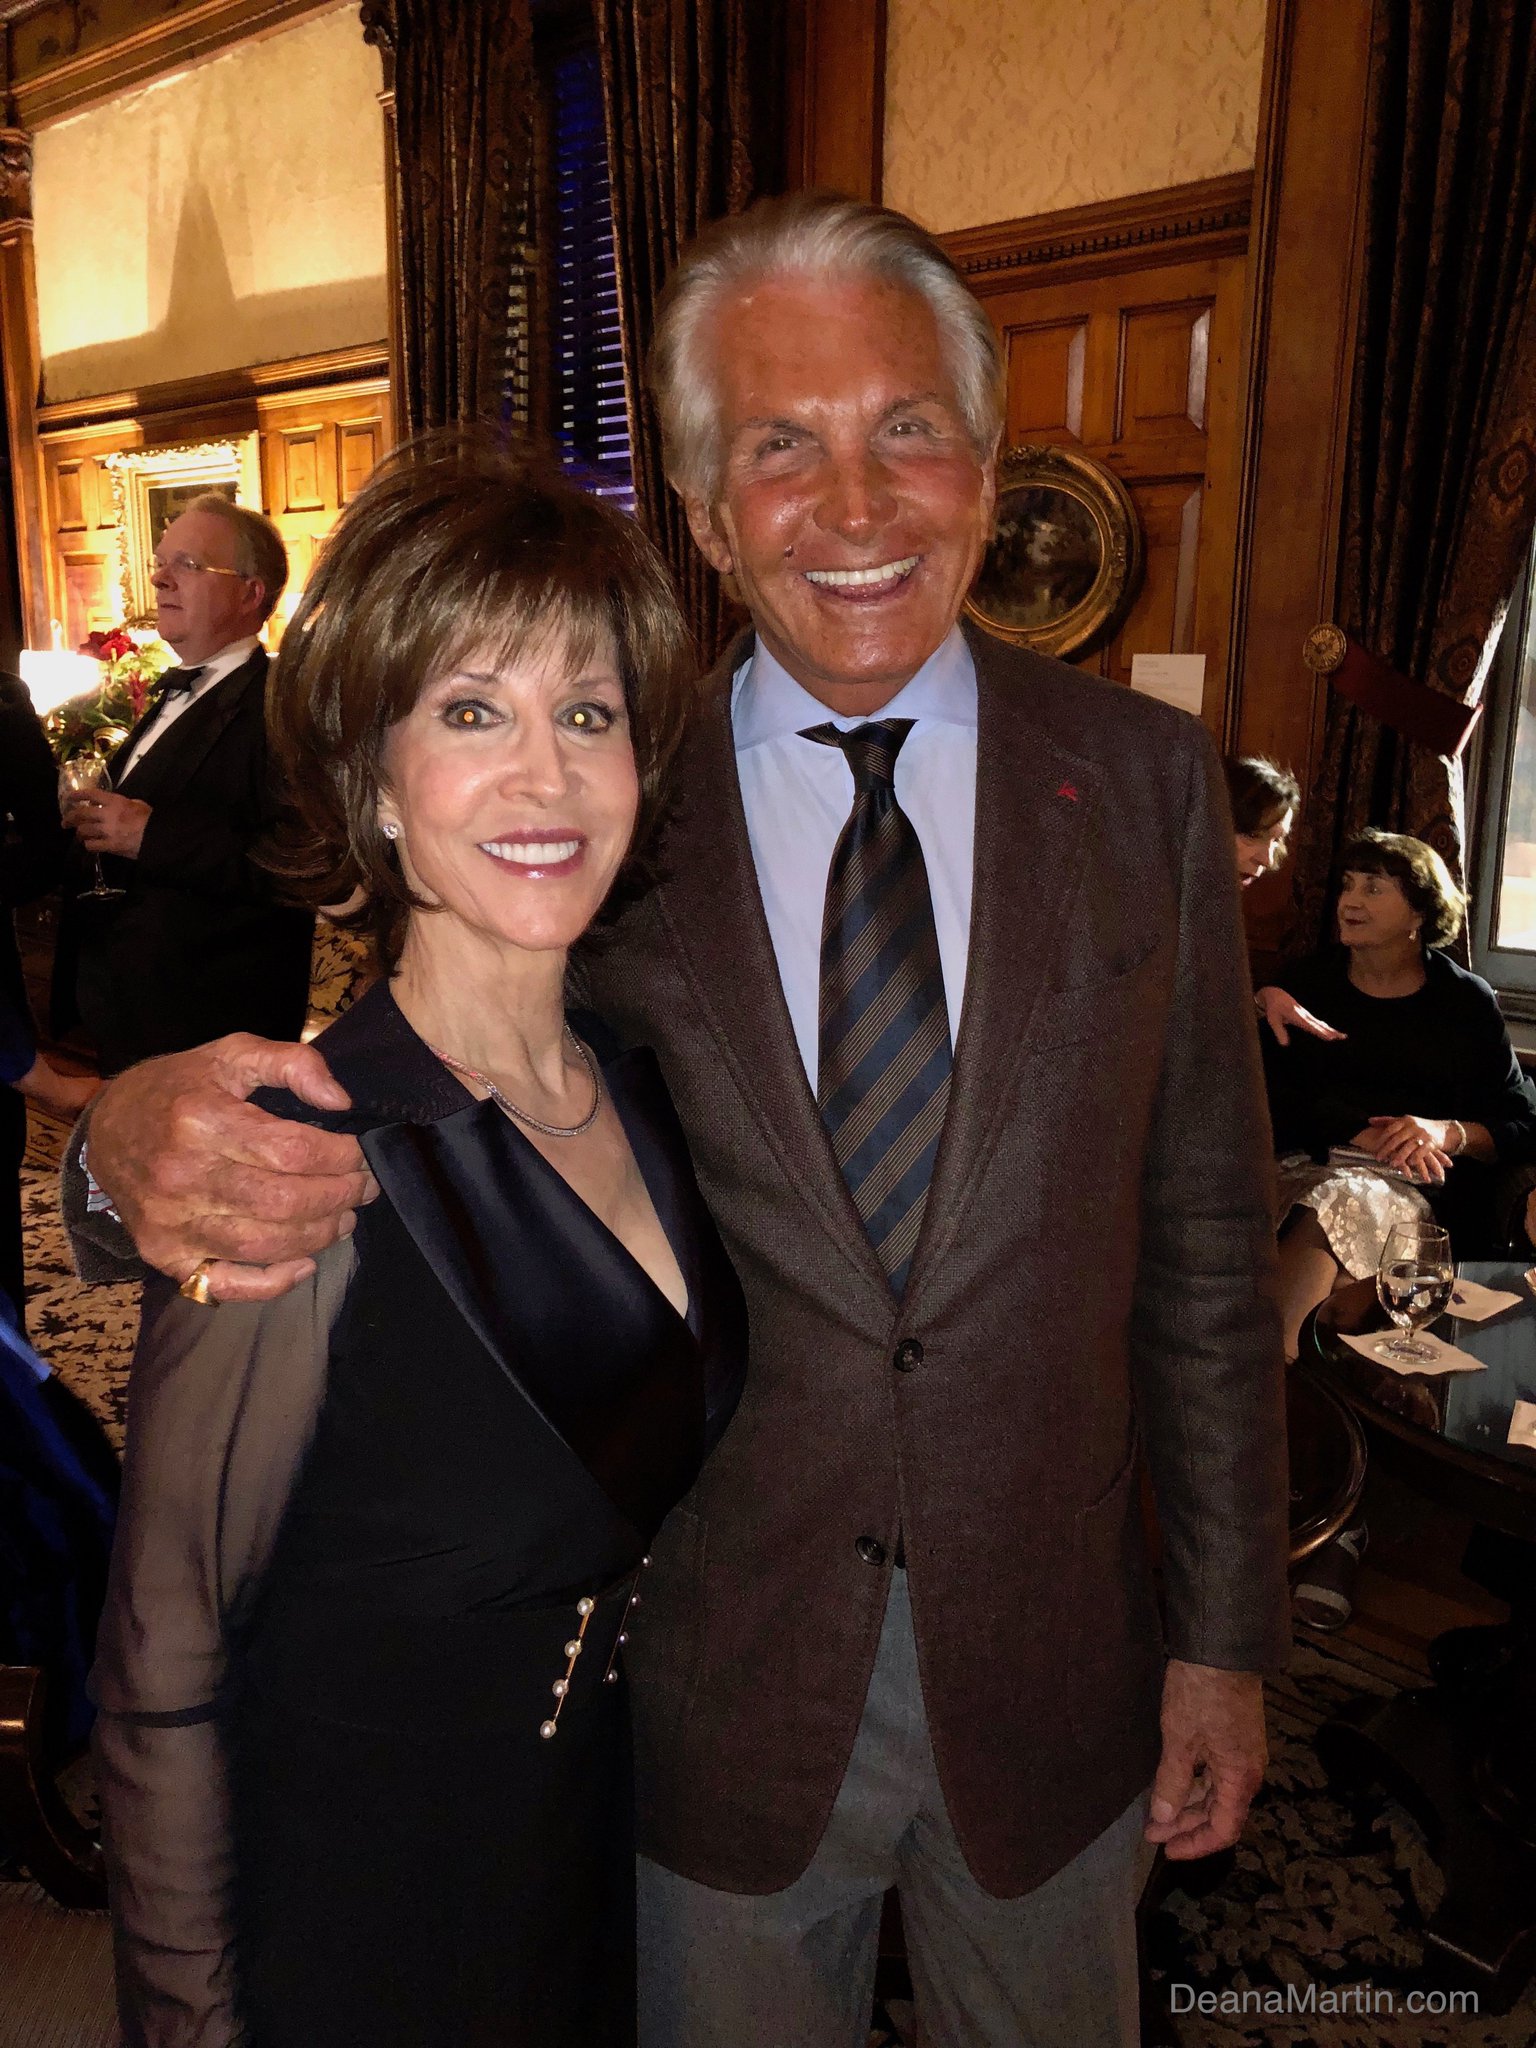 Please join us in wishing a very Happy birthday to our dear friend George Hamilton. Happy Birthday George! 